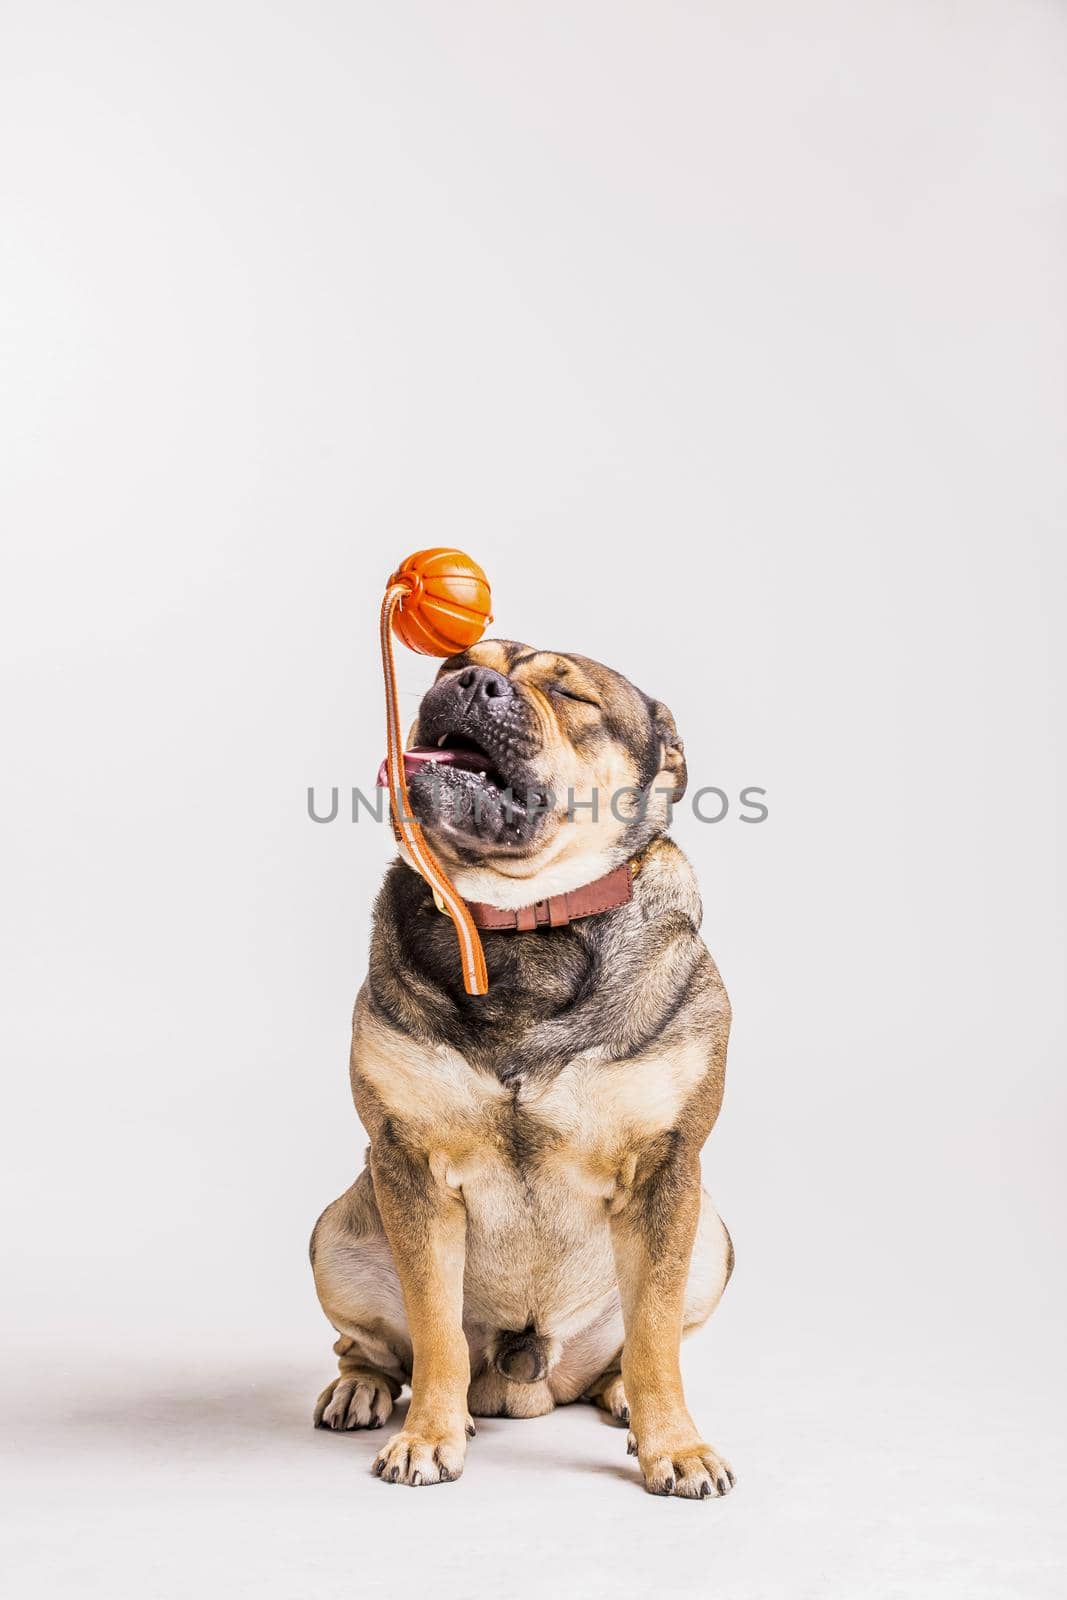 bulldog playing with toy over white background